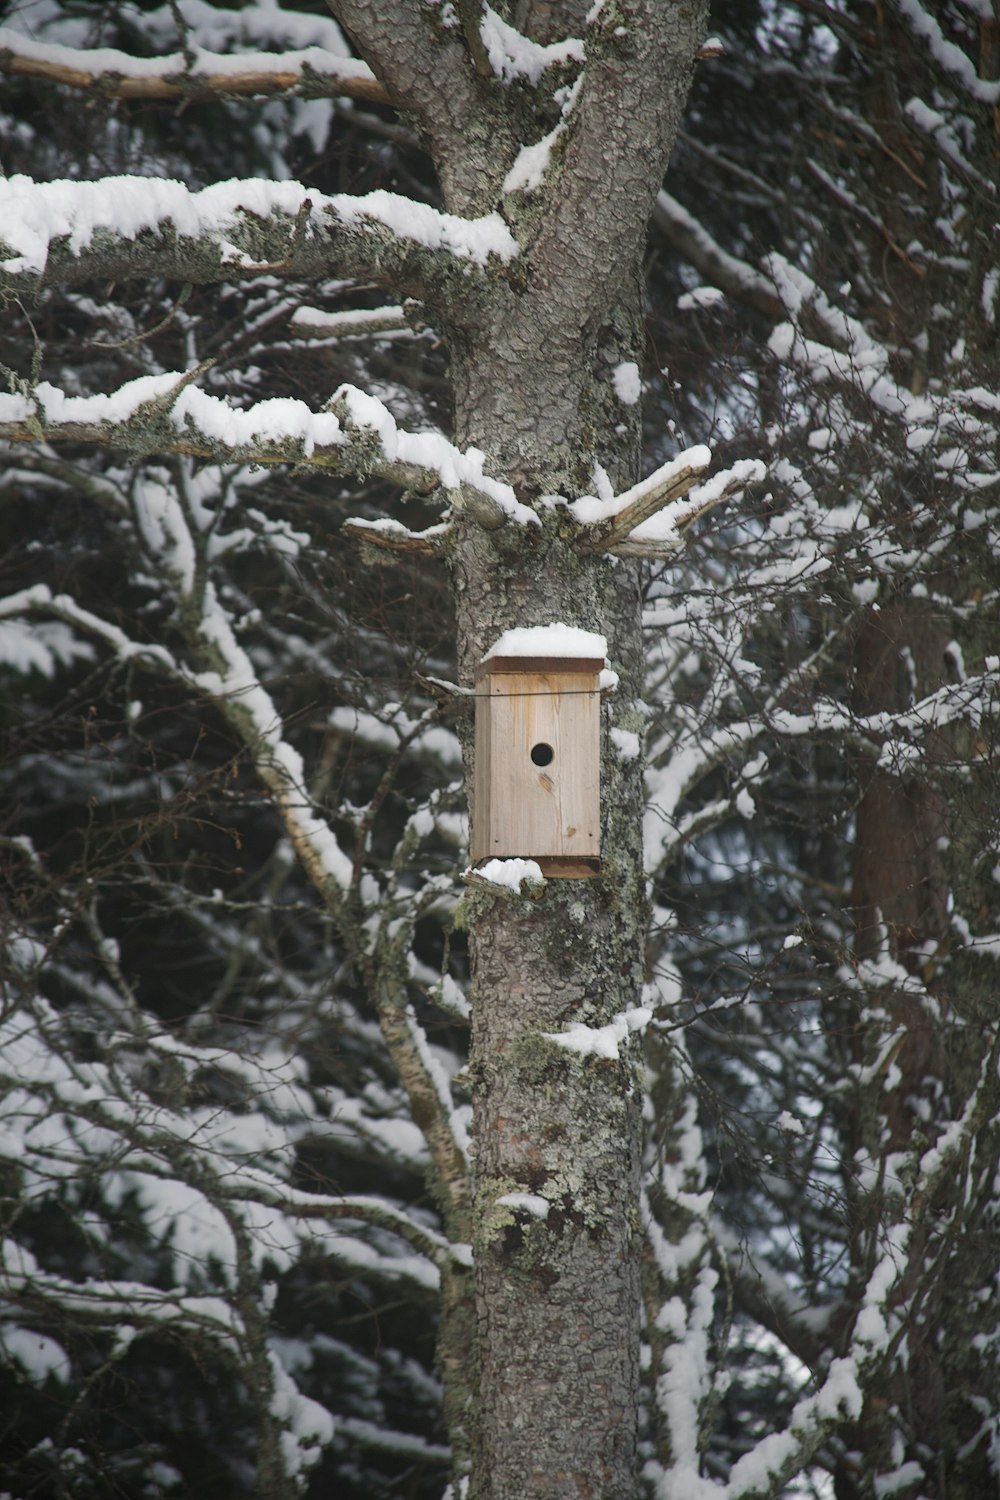 a bird house hanging from a tree in the snow